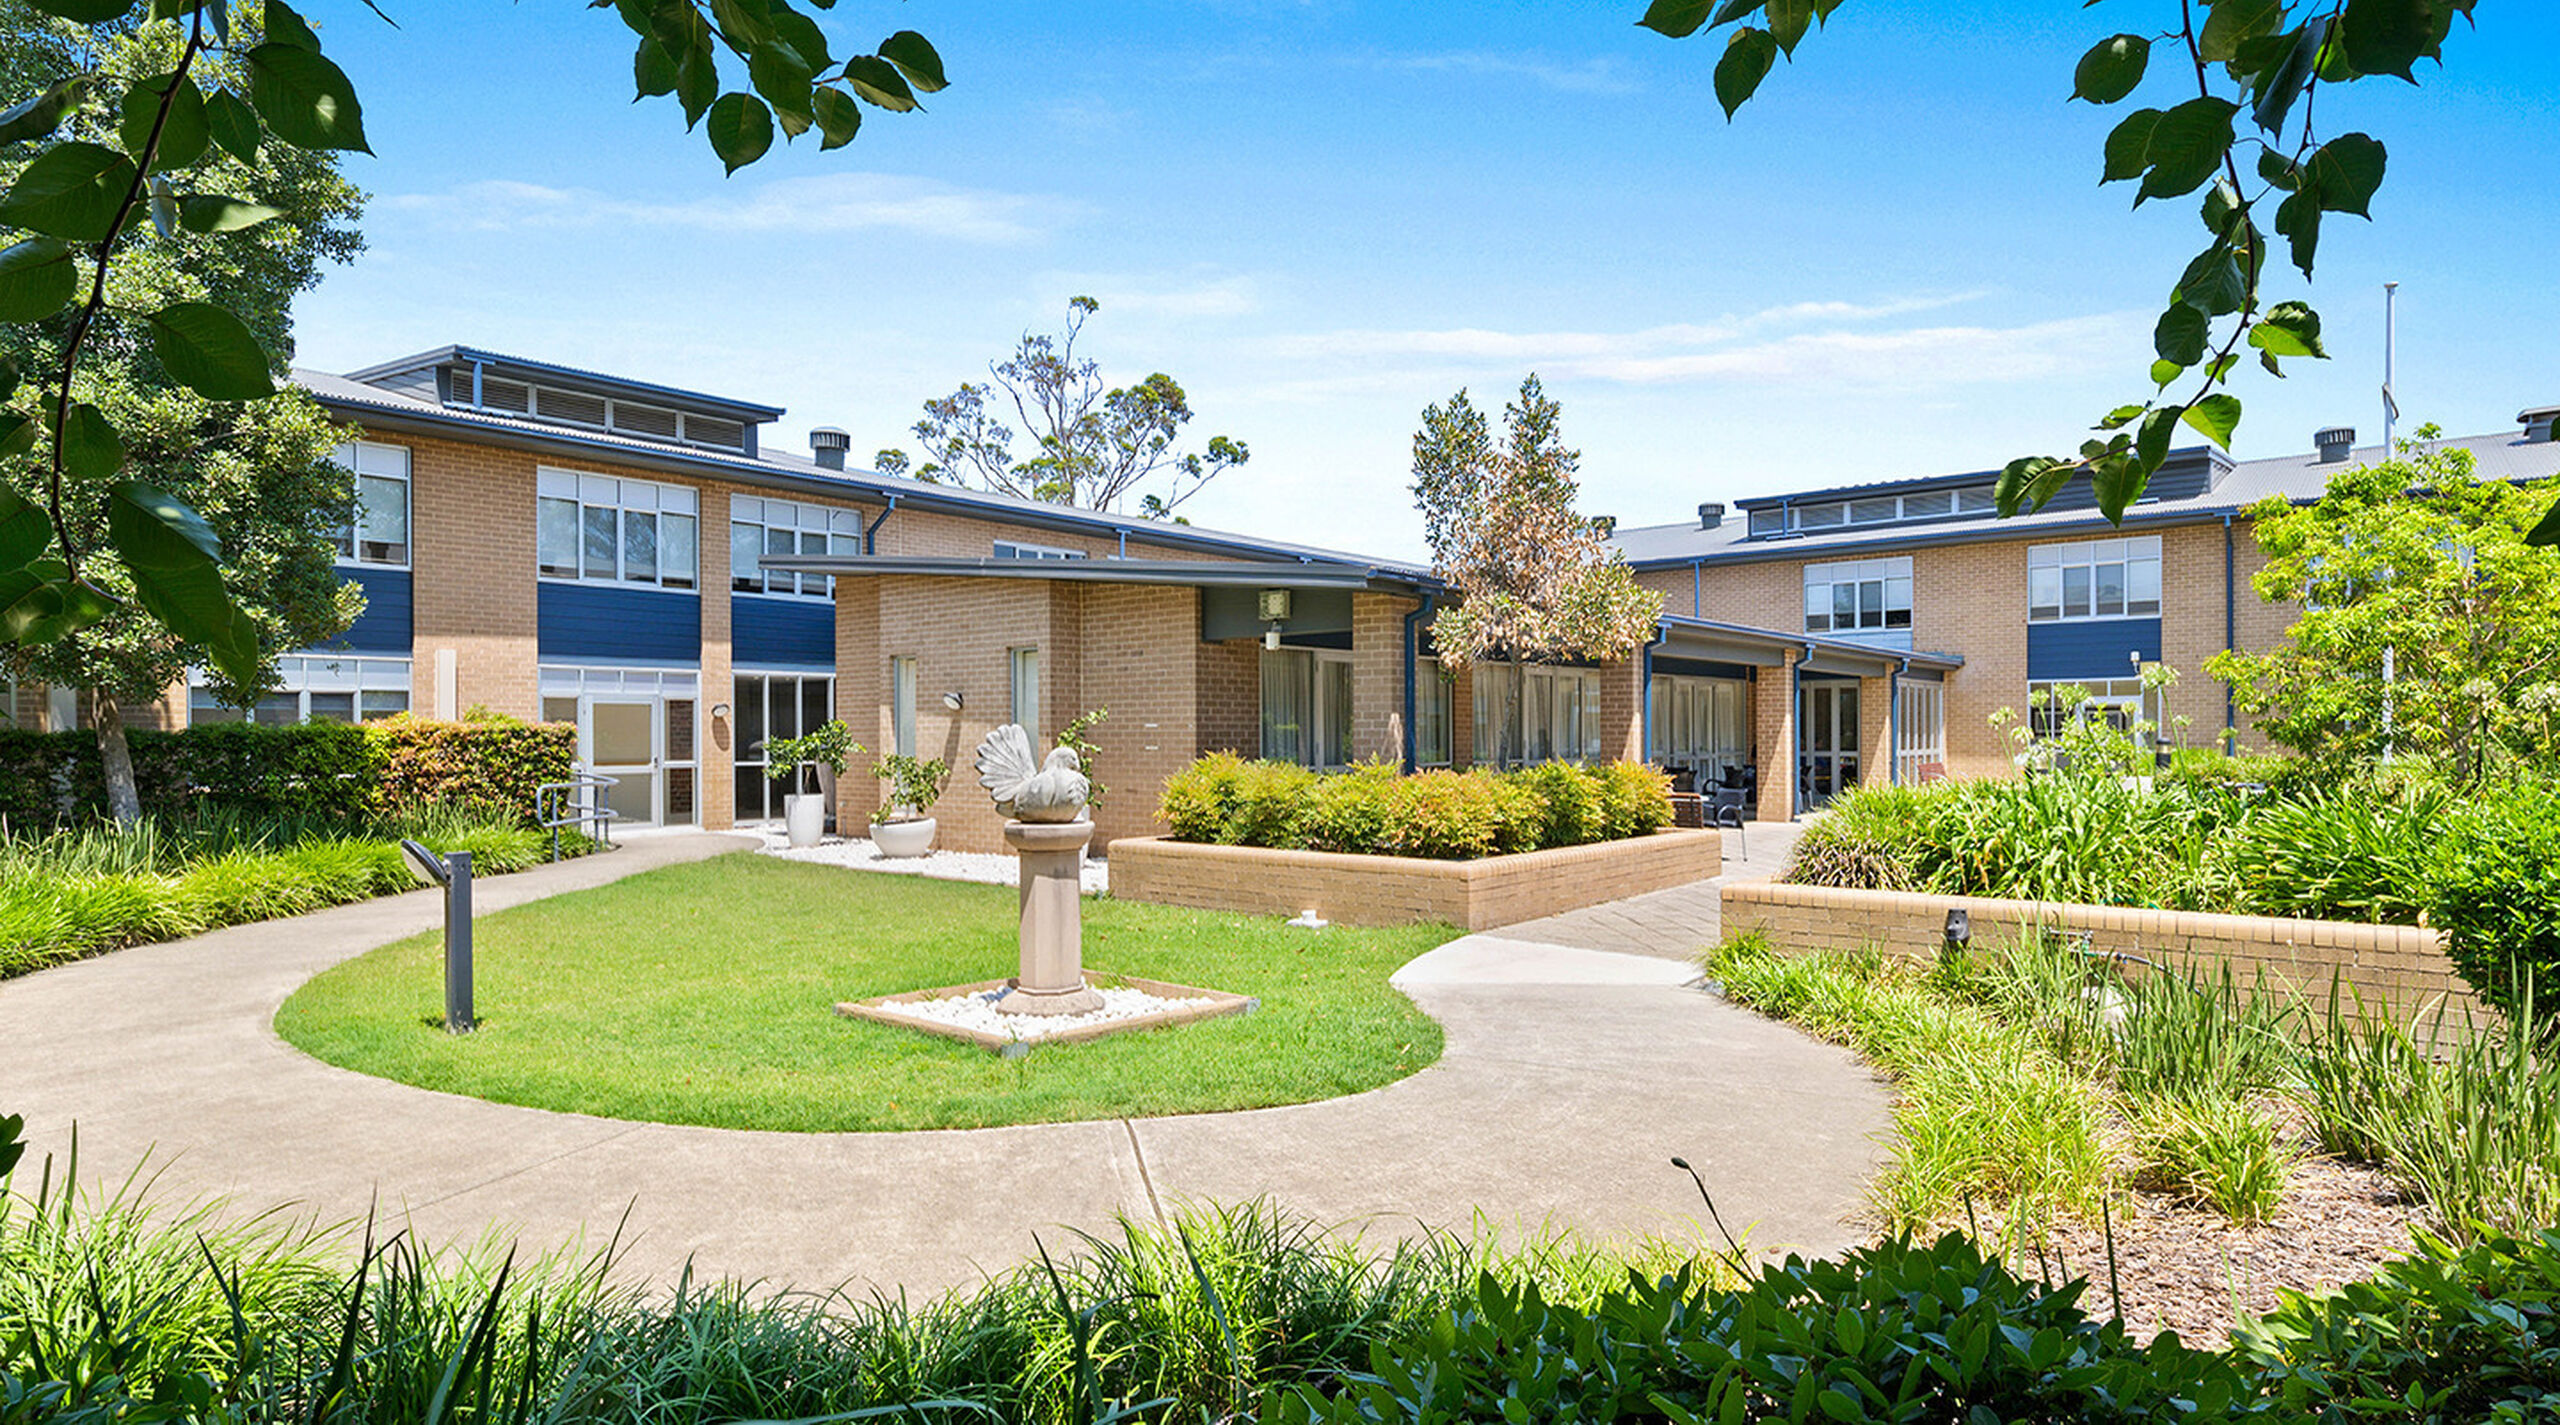 beautiful large gardens at the entrance of a modern aged care home providing low level care and dementia care for aged care residents in macquarie park nsw